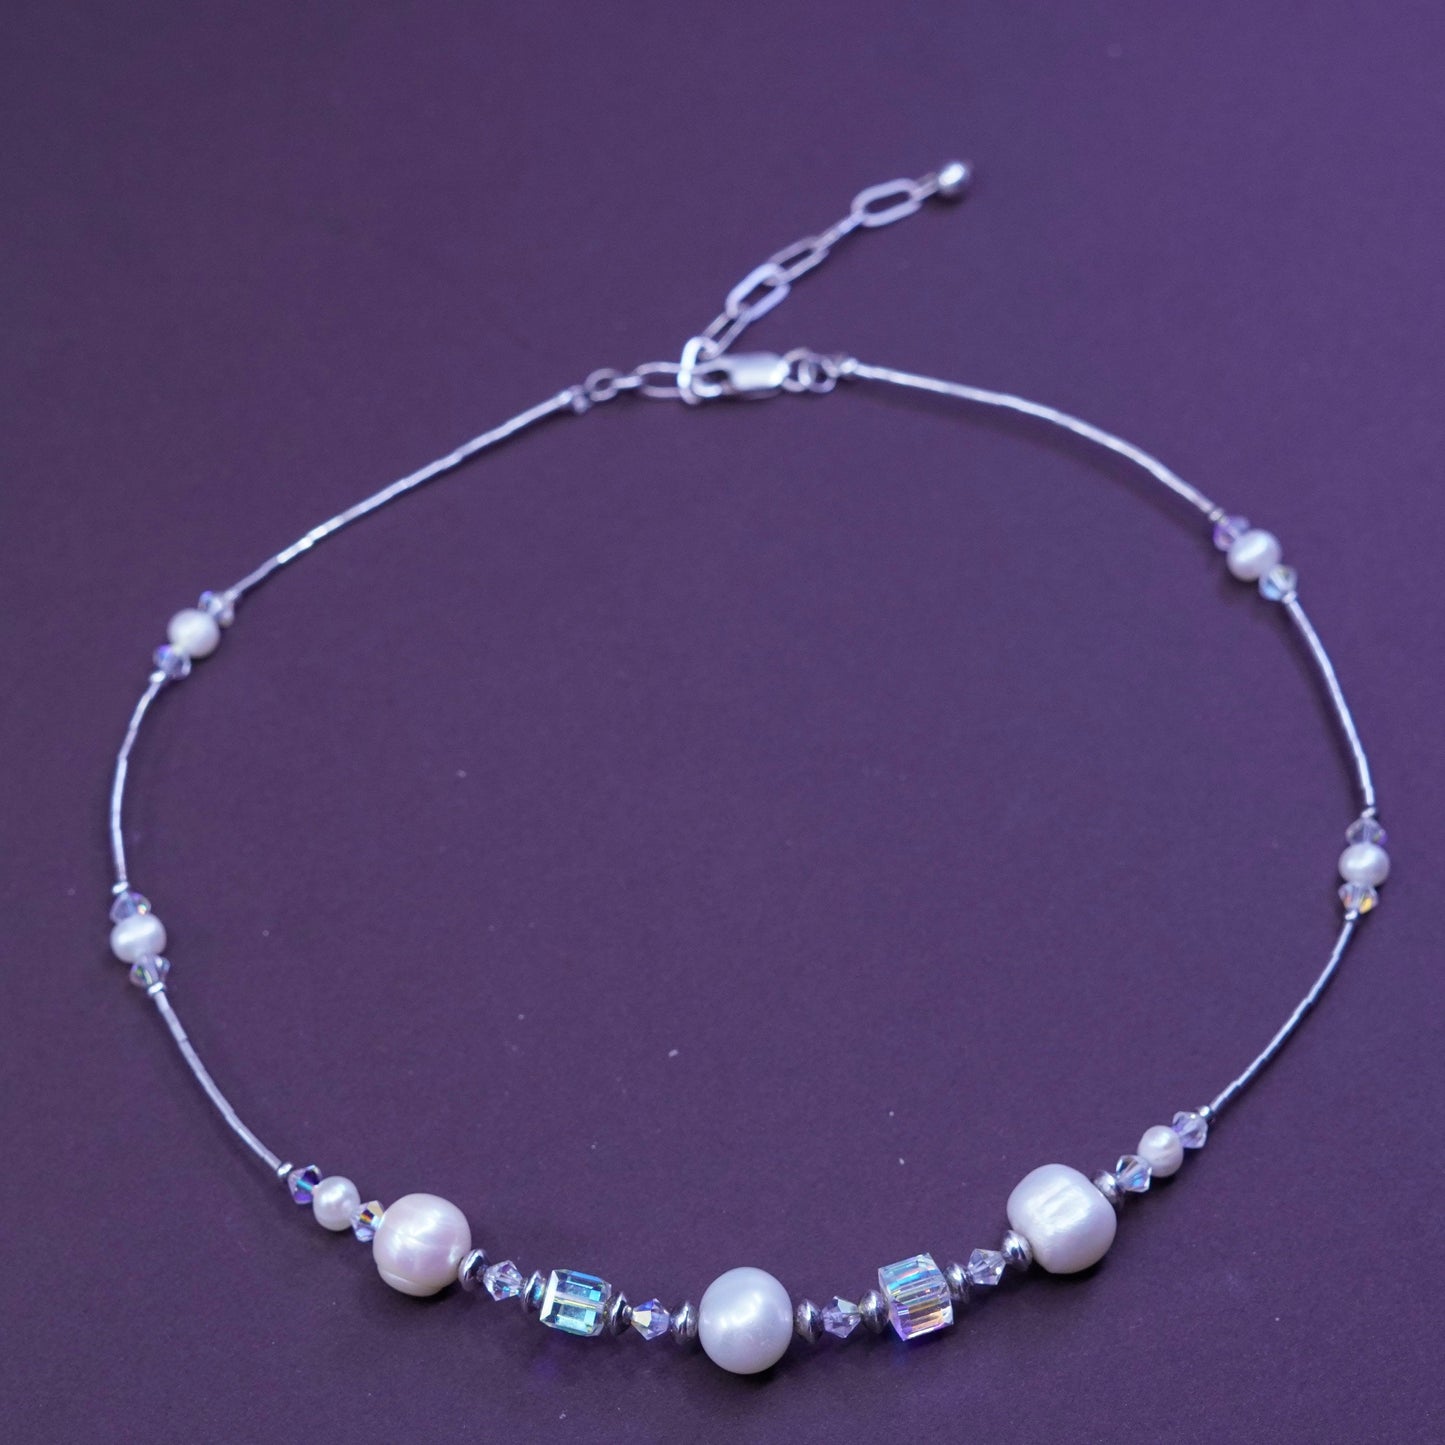 15+2”, Sterling 925 liquid silver handmade necklace freshwater pearl crystal